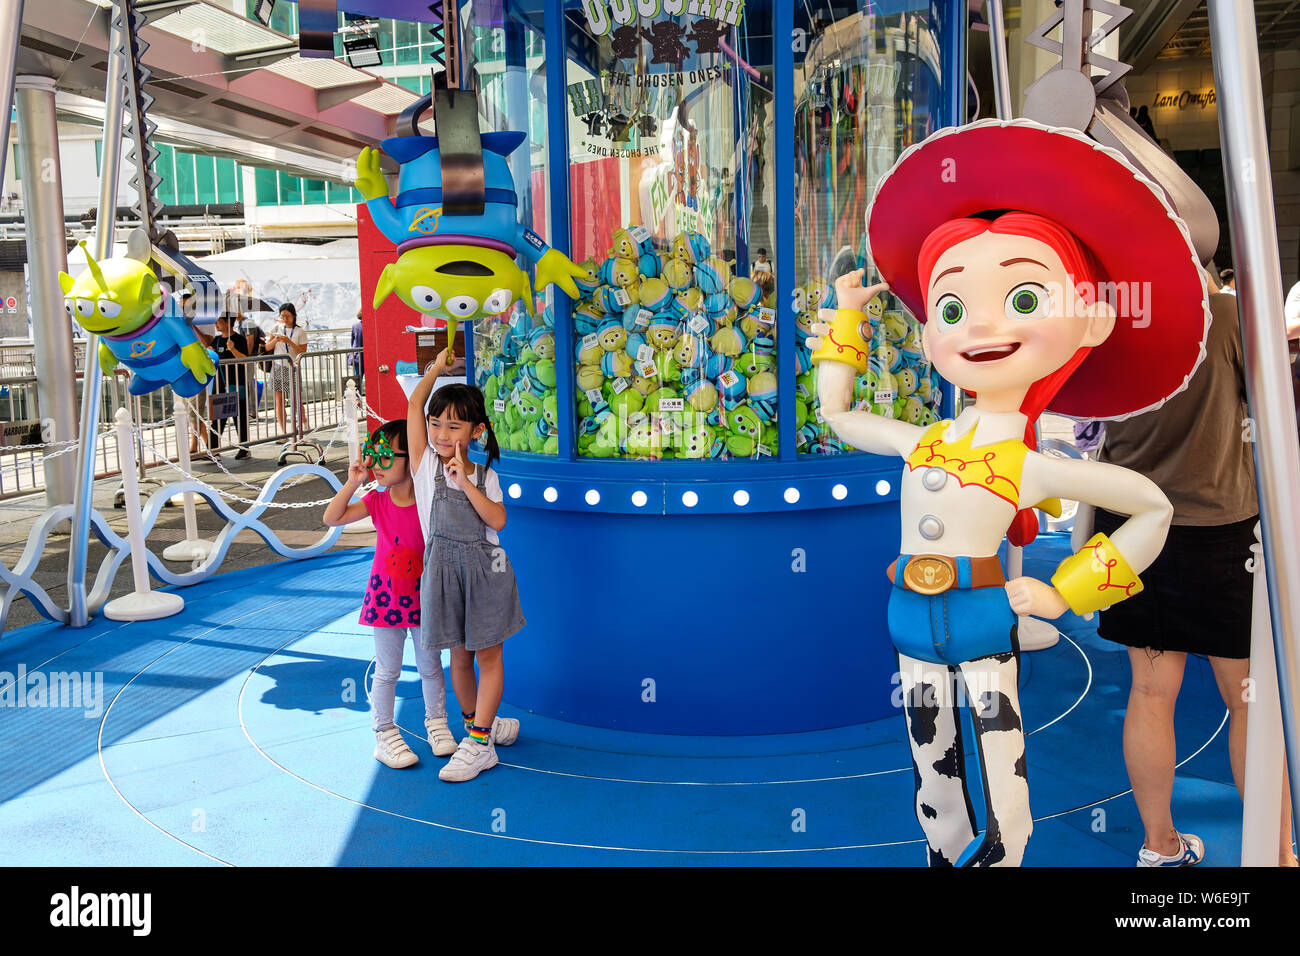 A replica of Jessie during the Carnival.Toy Story 4 is celebrated with a themed carnival of different games and challenges at Hong Kong Harbour City. Stock Photo